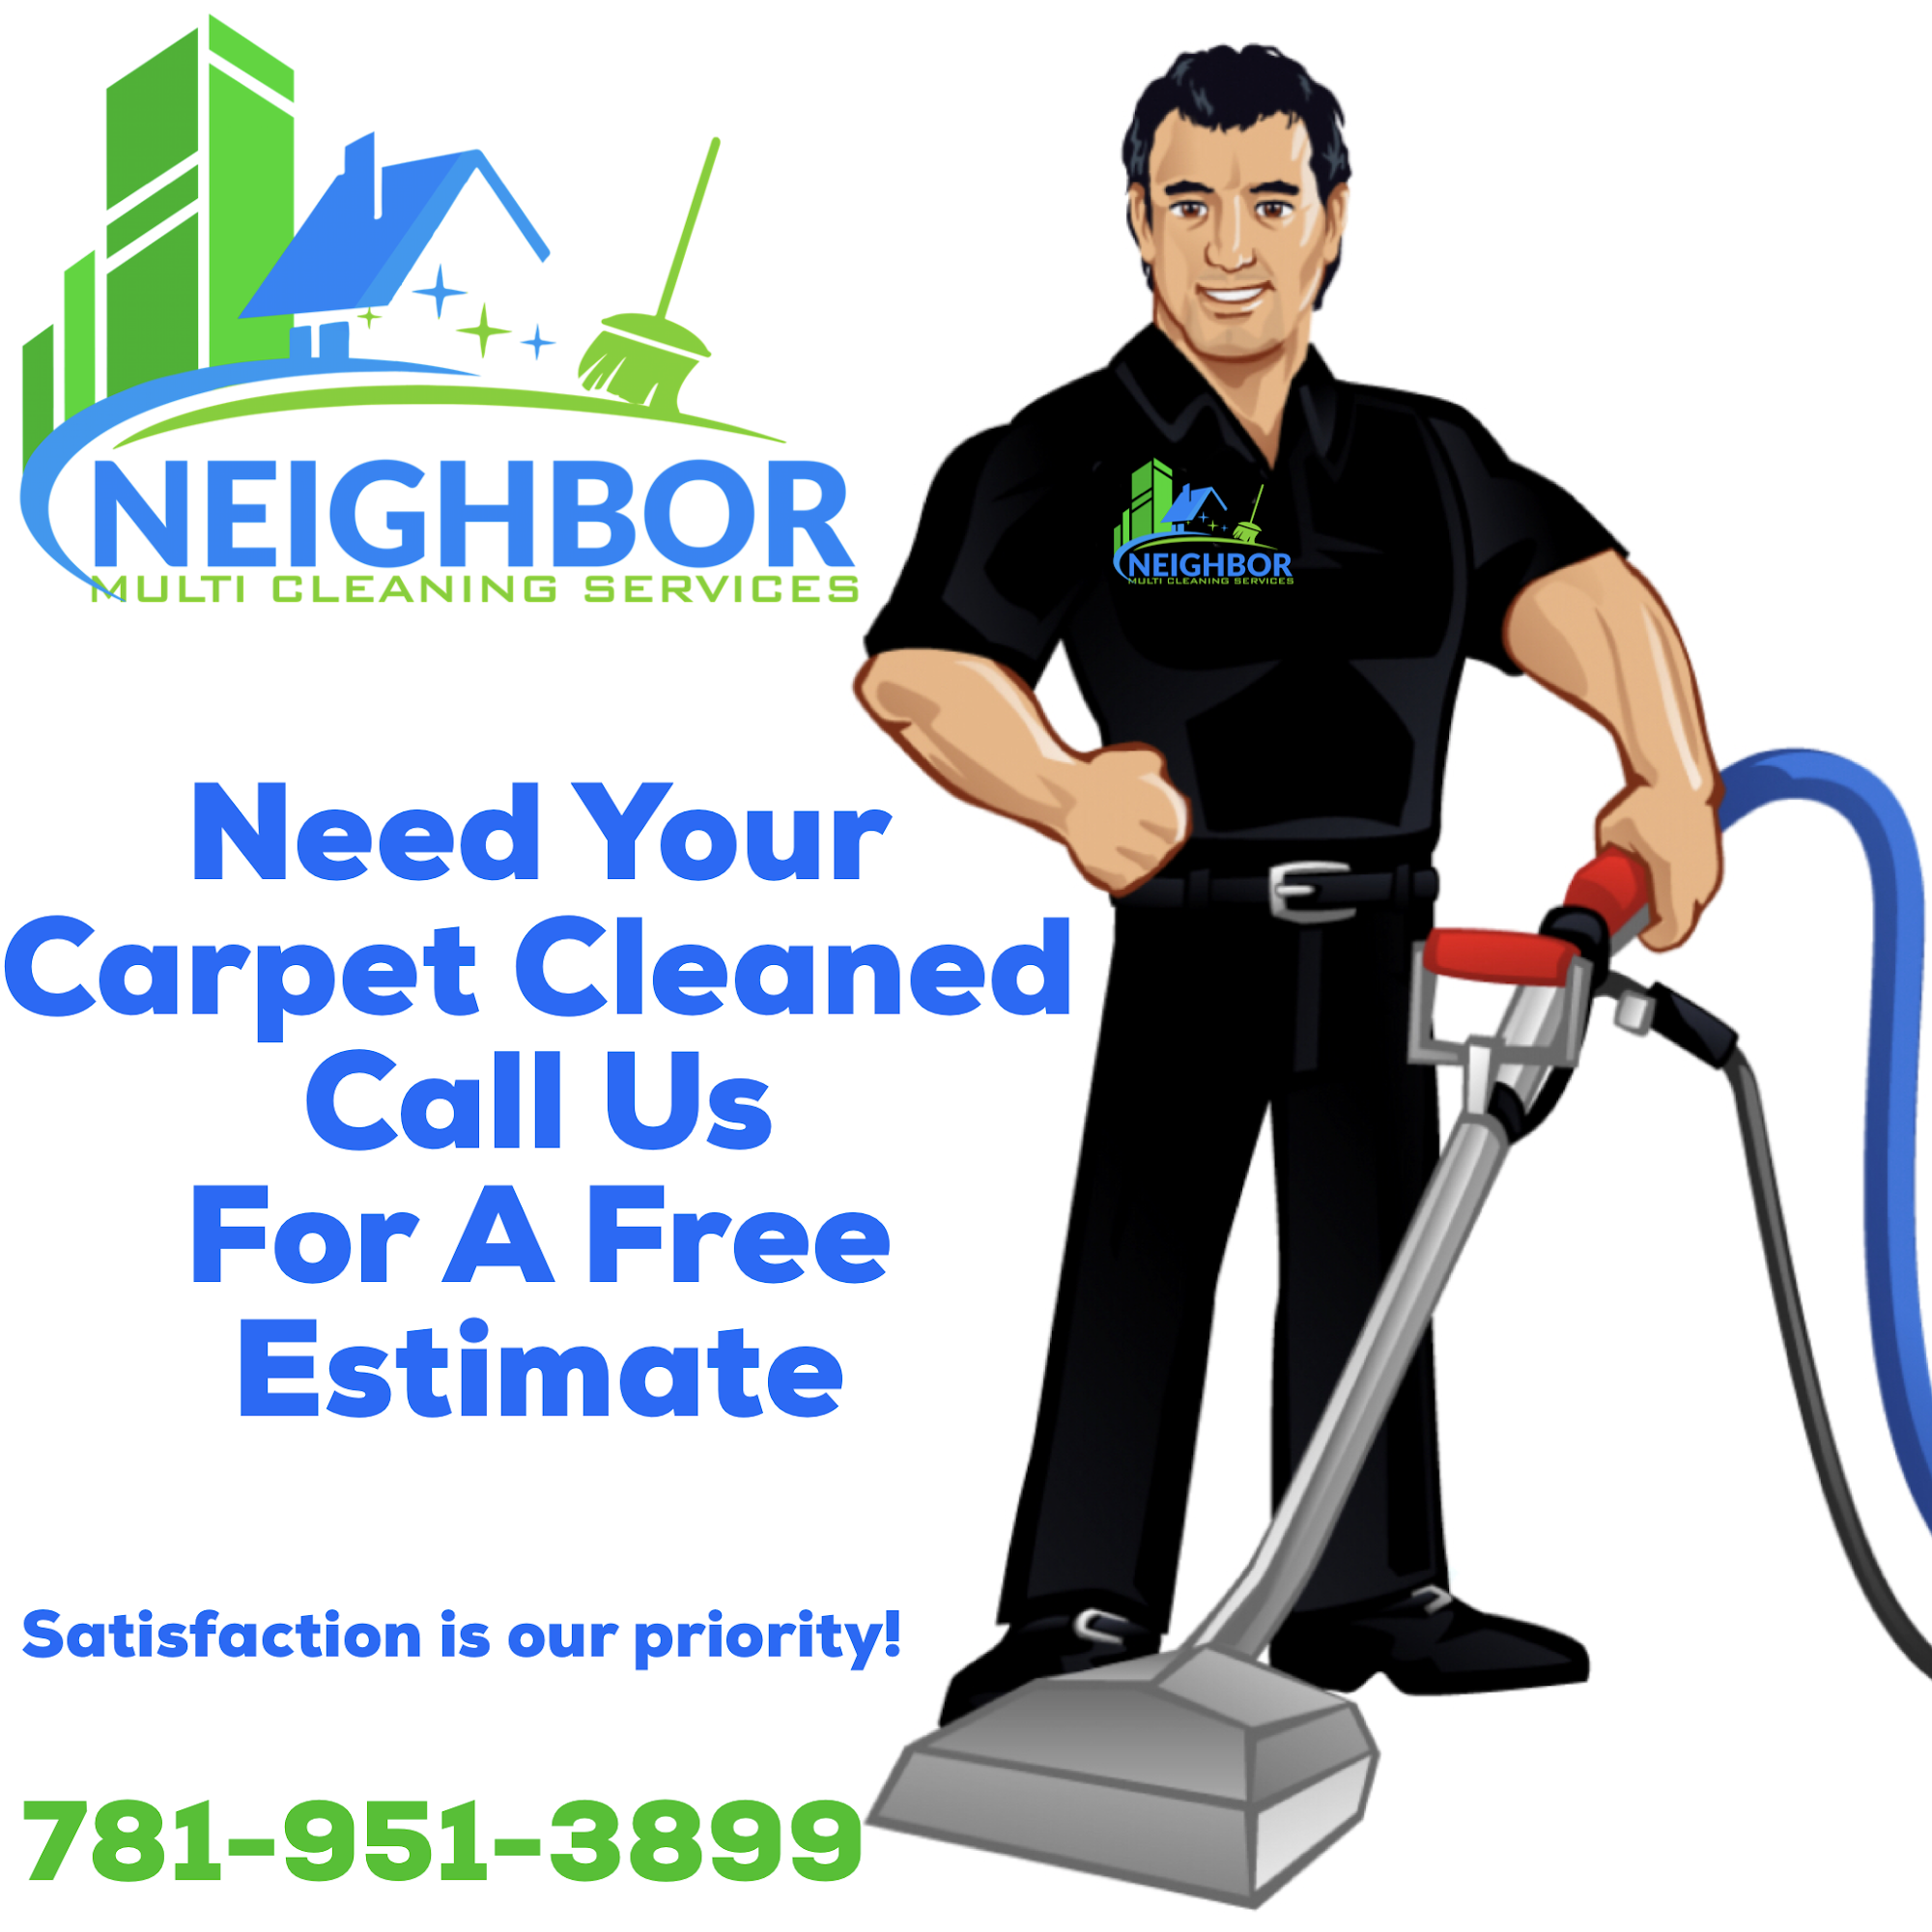 Neighbor Multi Cleaning Services